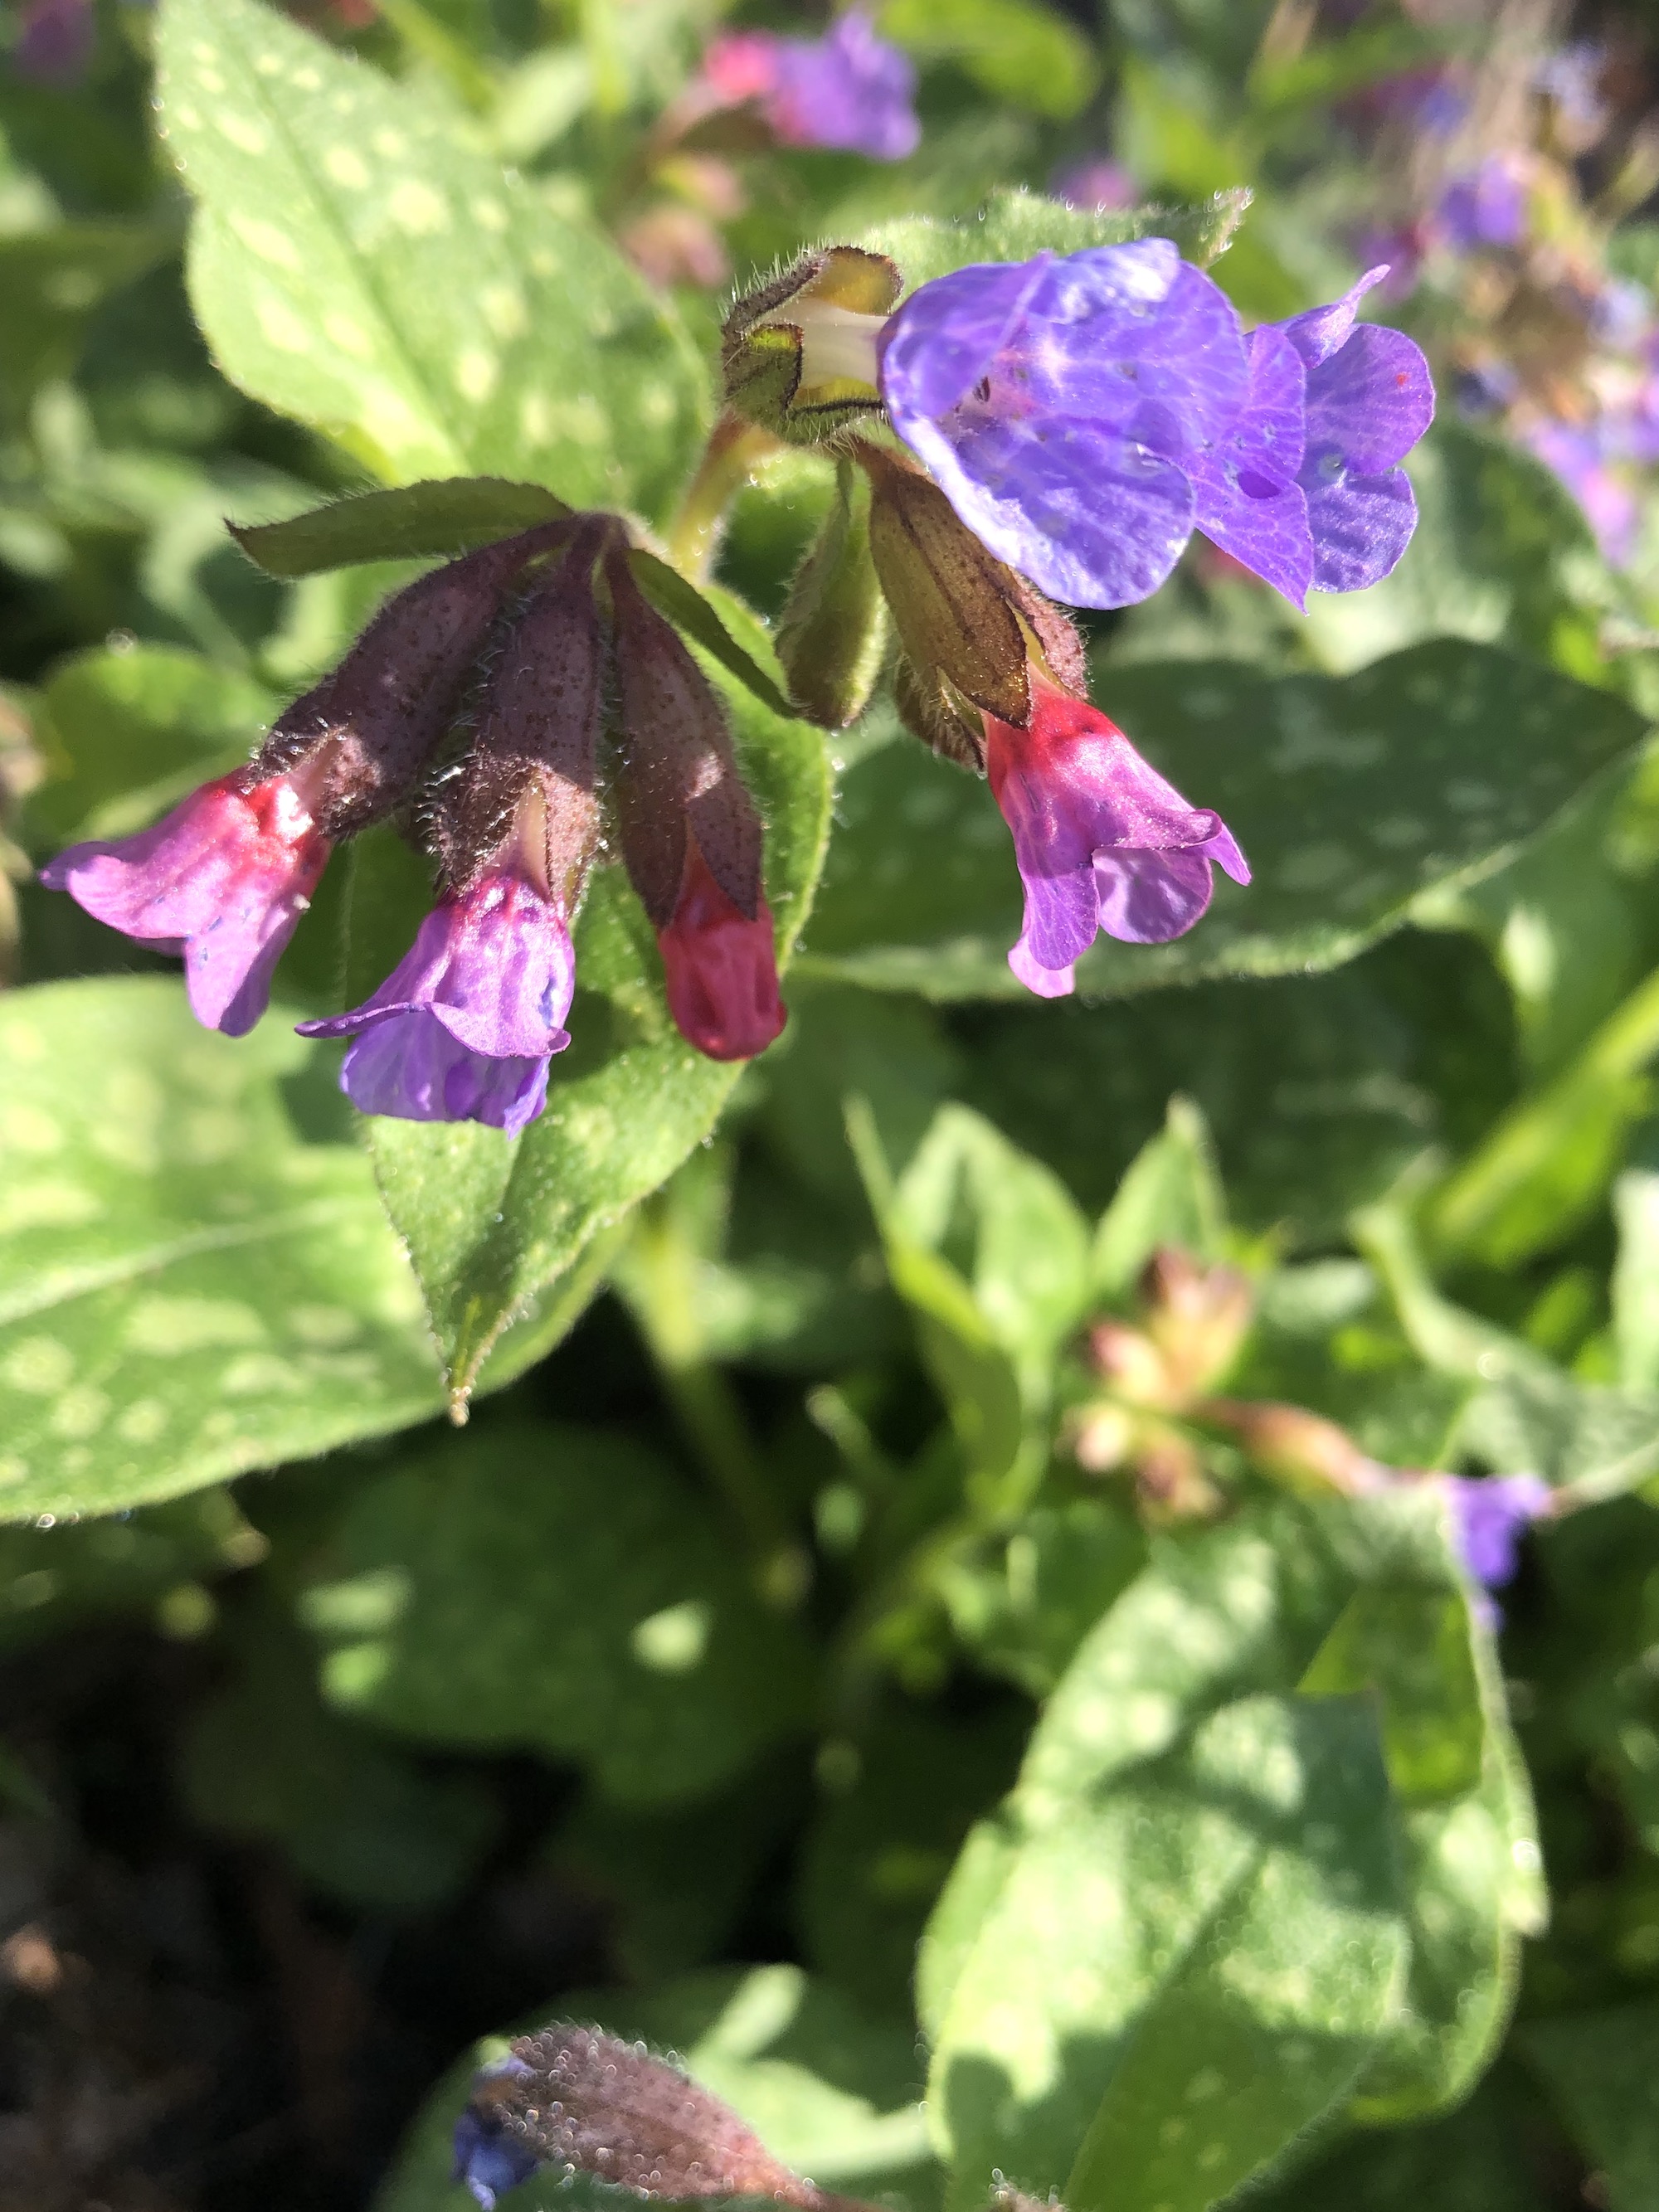 Lungwort near Agawa Path in Nakoma in Madison, Wisconsin on April 16, 2021.